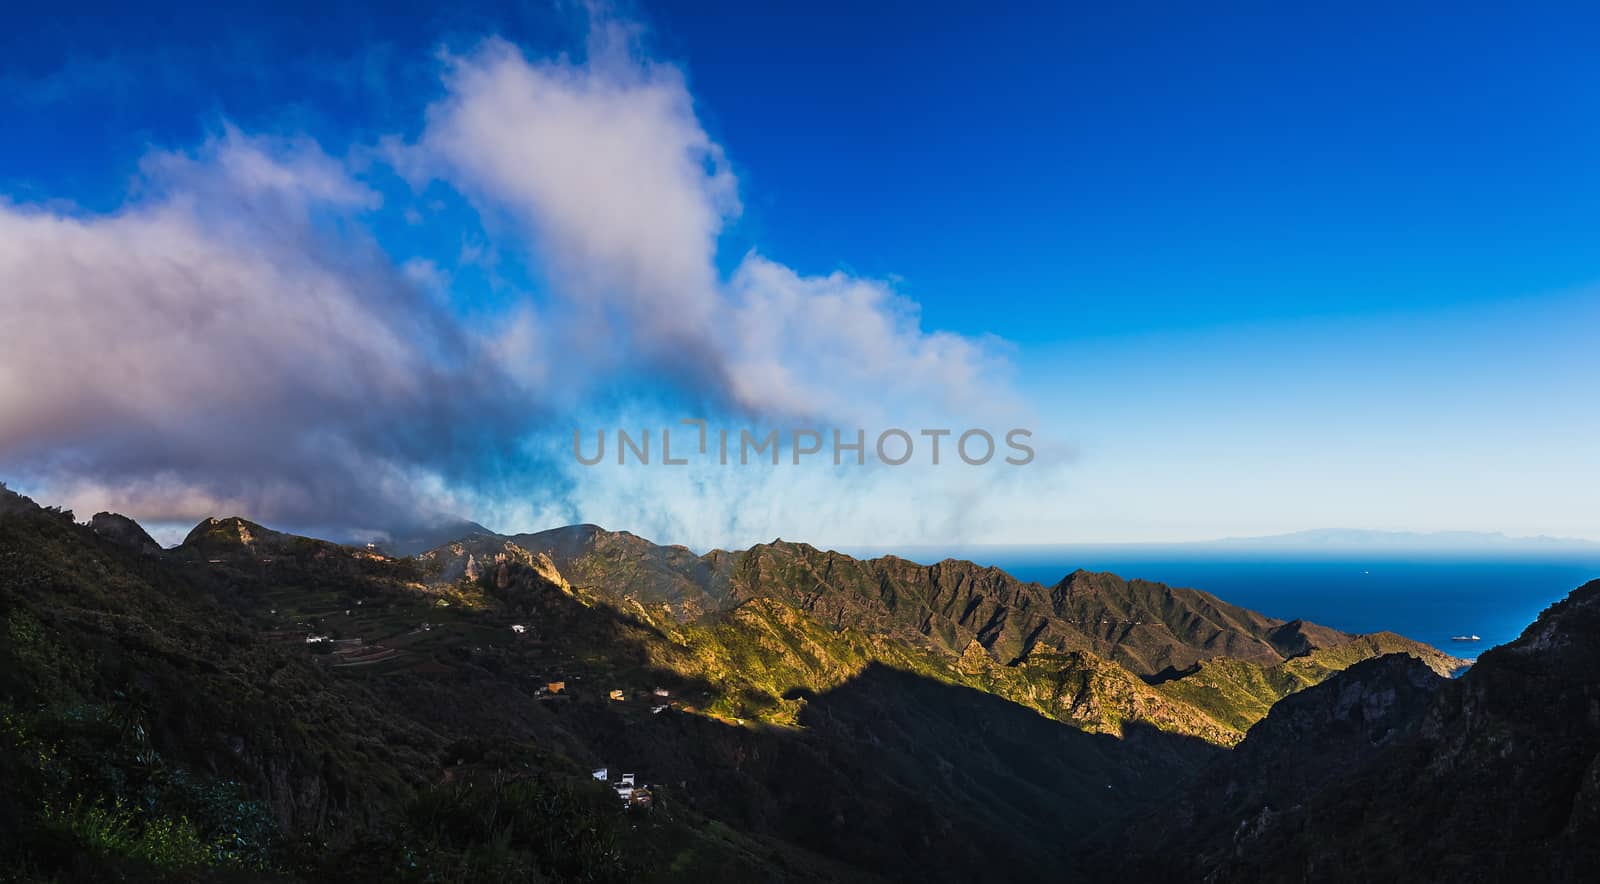 Clouds and mountains or rocks with blue sky horizon background near the Atlantic ocean landscape in Tenerife Canary island, Spain